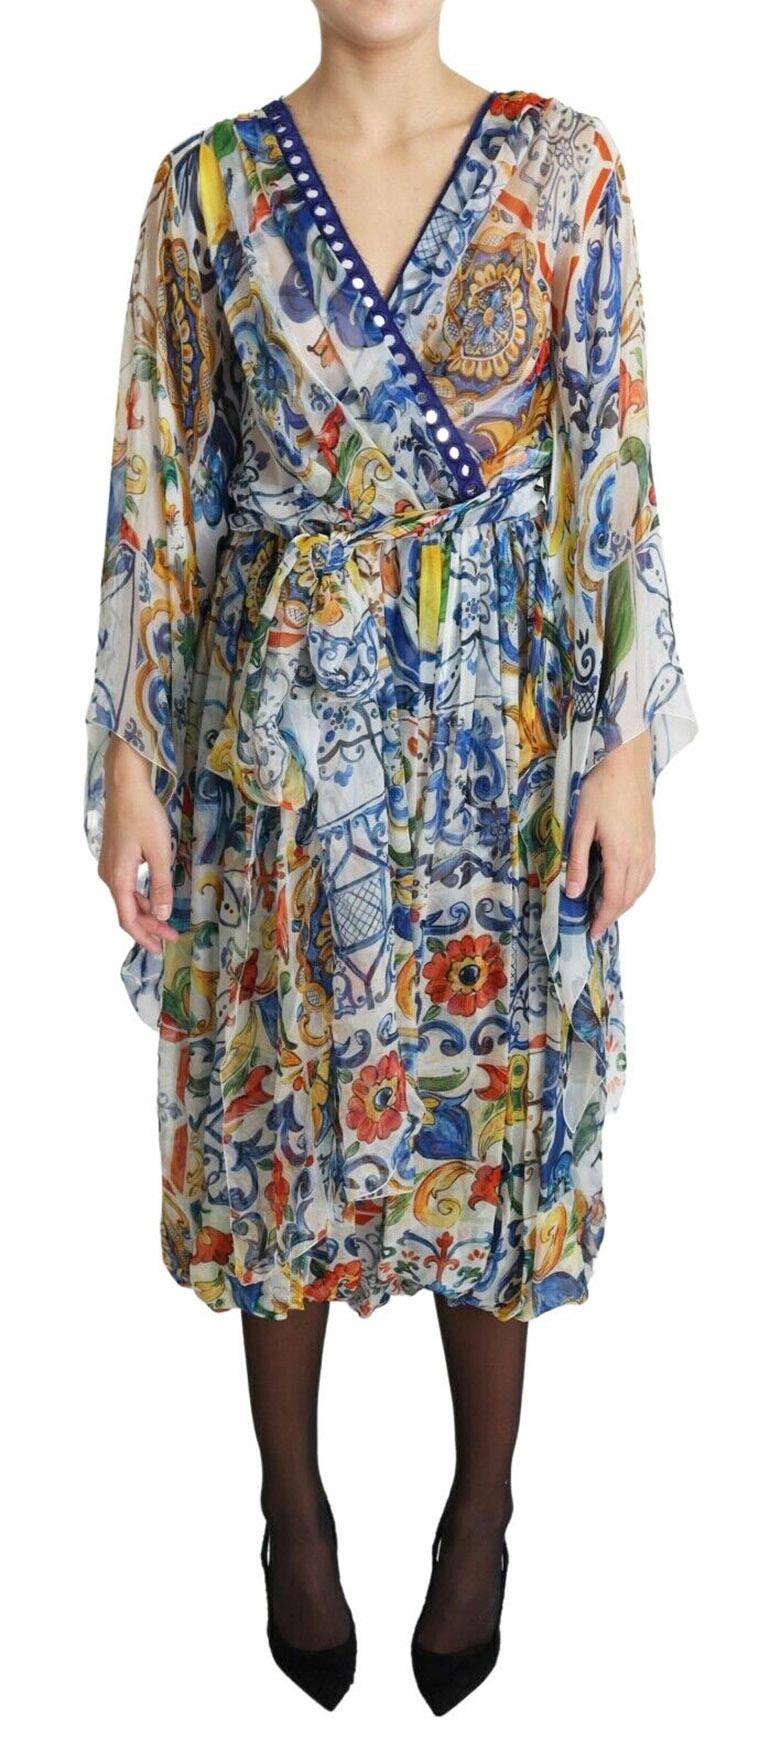 Gorgeous brand new with tags, 100% Authentic Dolce & Gabbana silk wrap style dress. It features all-over majolica print, v-neck and concealed back zip closure.

Model: Wrap, midi dress

Color: Multicolor majolica print

Zipper opening on the